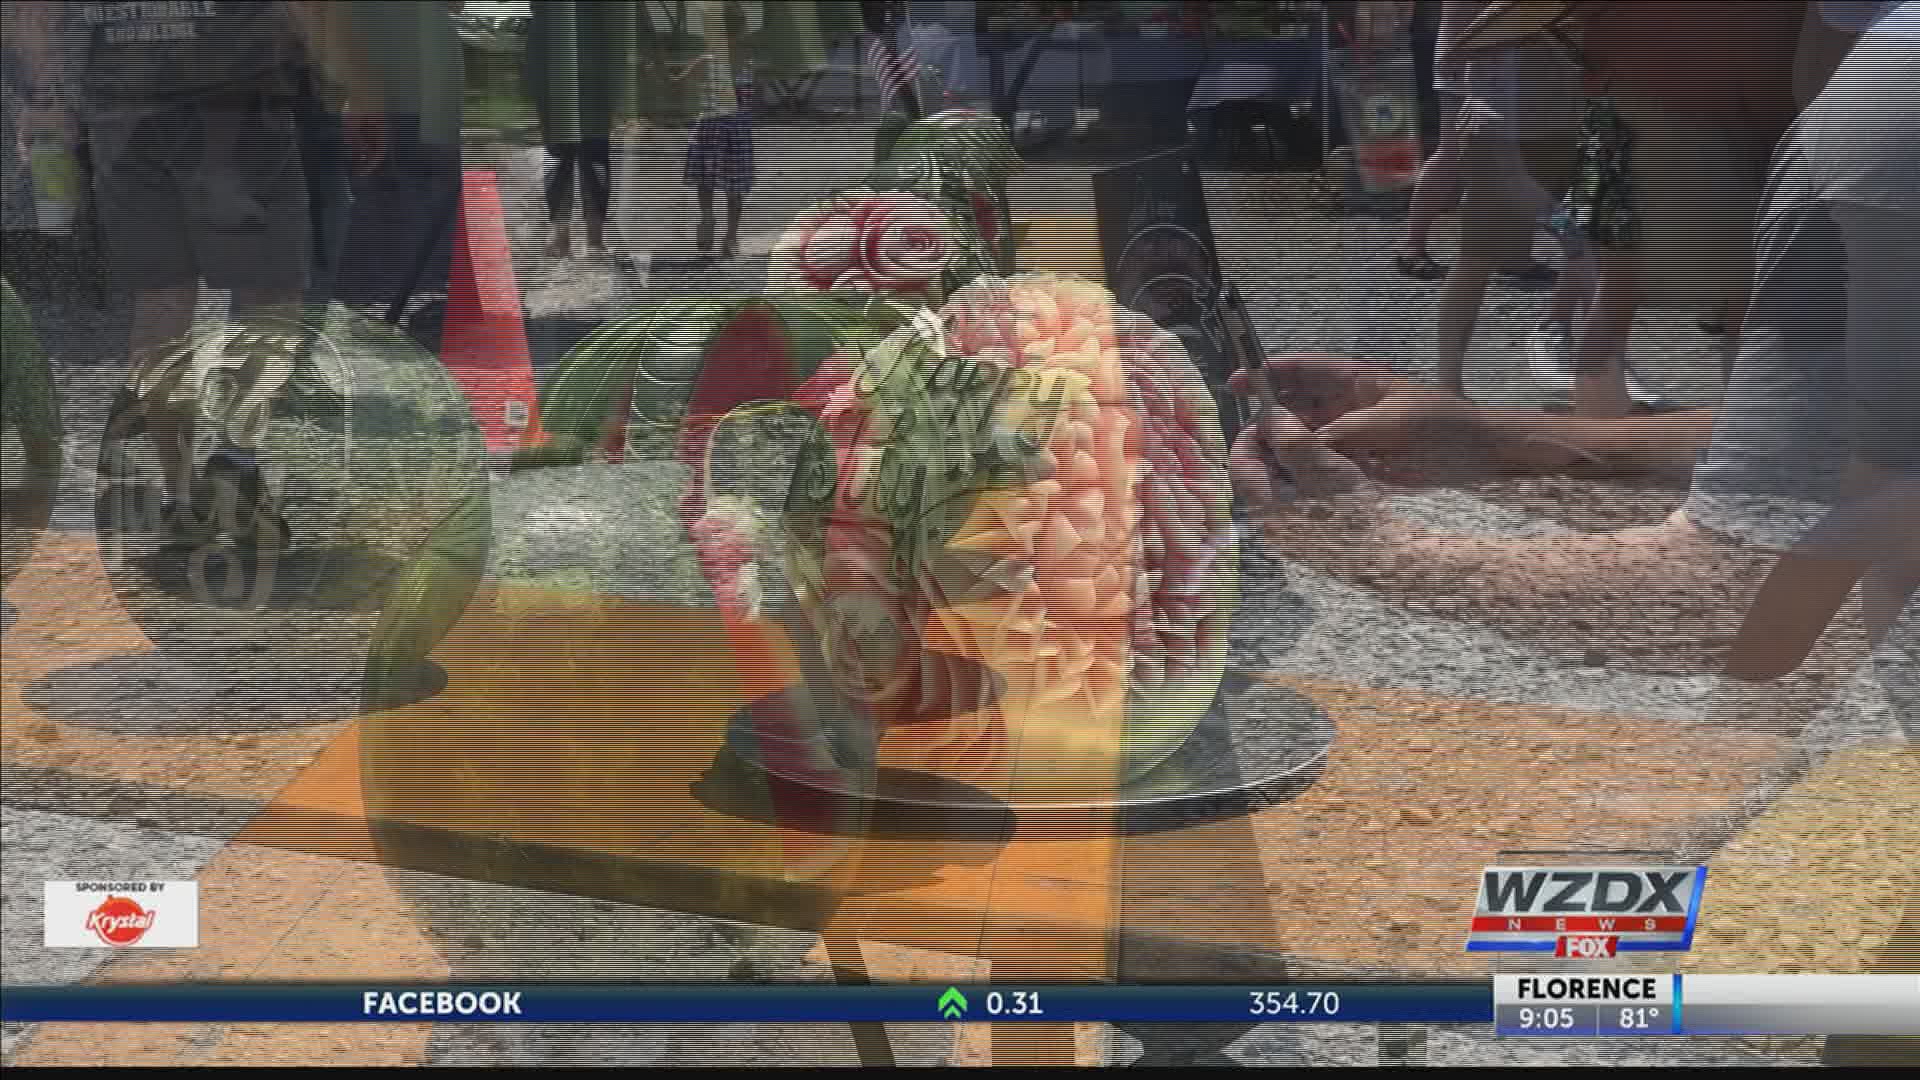 MidCity District and The Camp hosted their 3rd Annual Watermelon Carving Contest and although there were nine submissions, there can only be one winner!